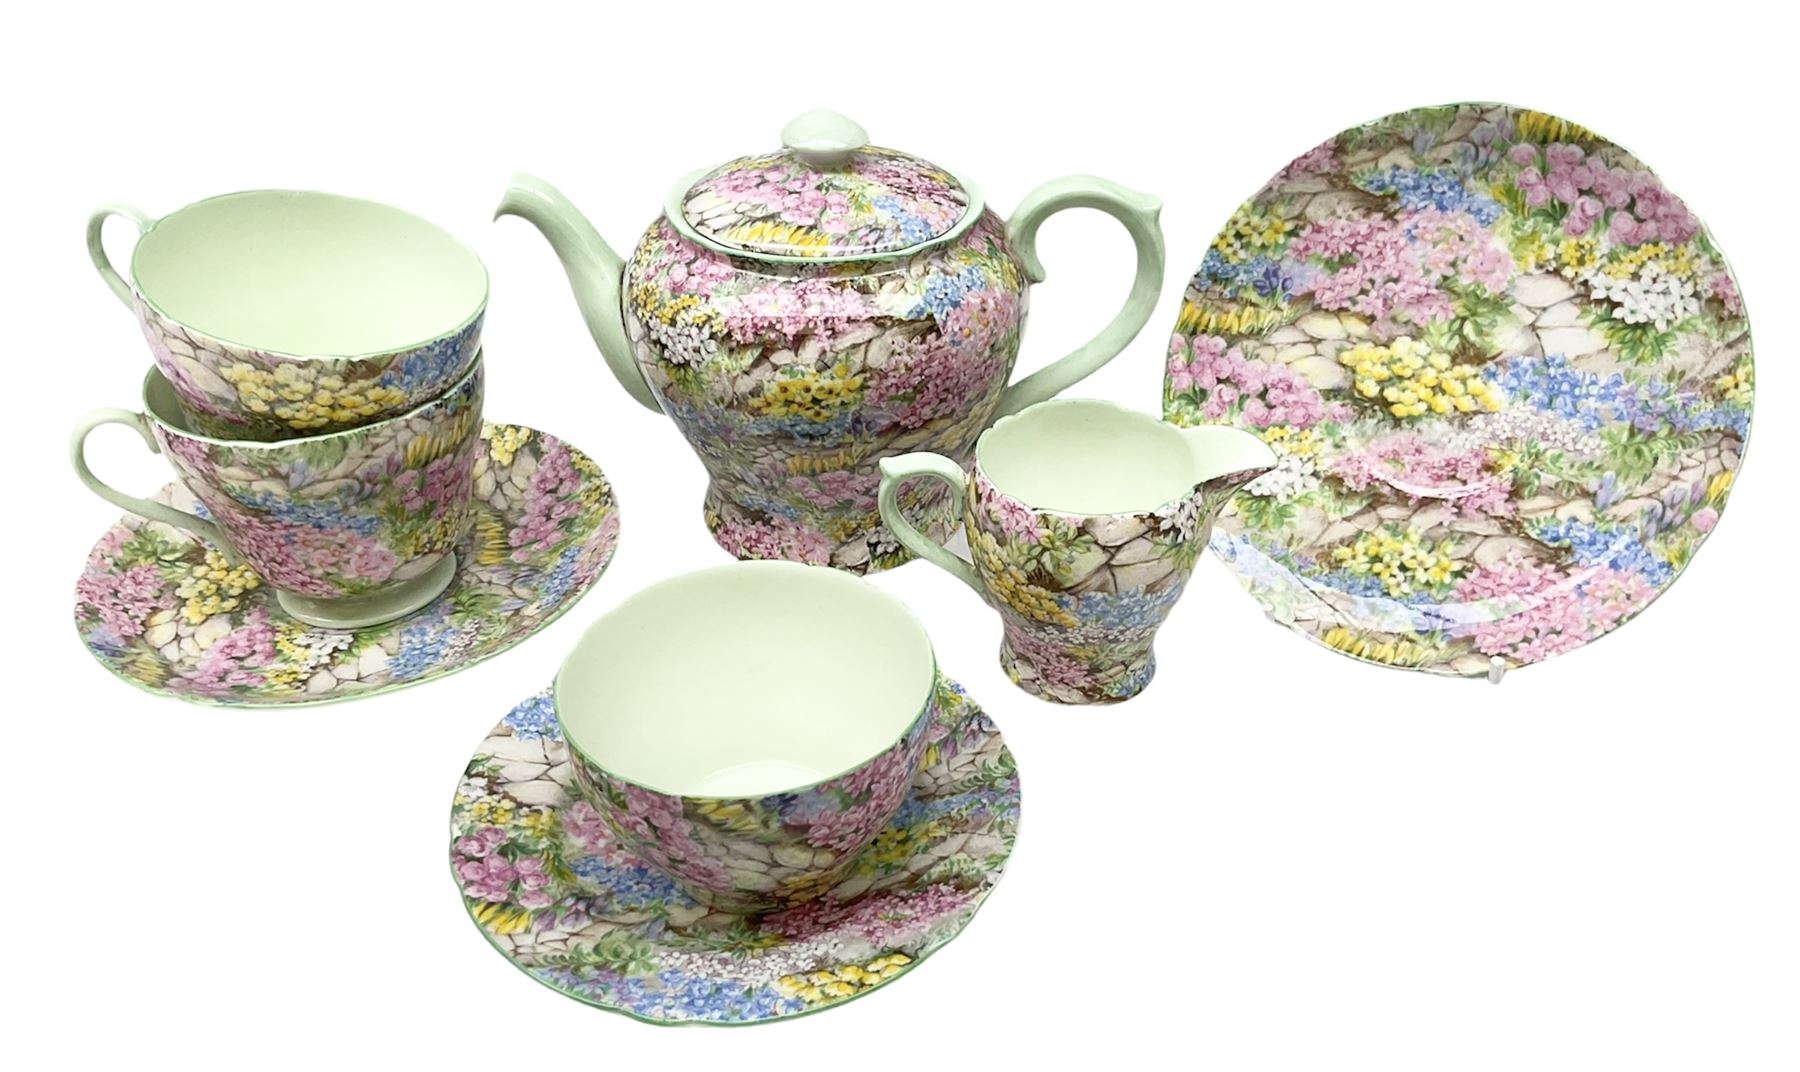 Shelley early morning tea set for two in the 'Rock Garden' pattern No.13454 comprising tea pot and c